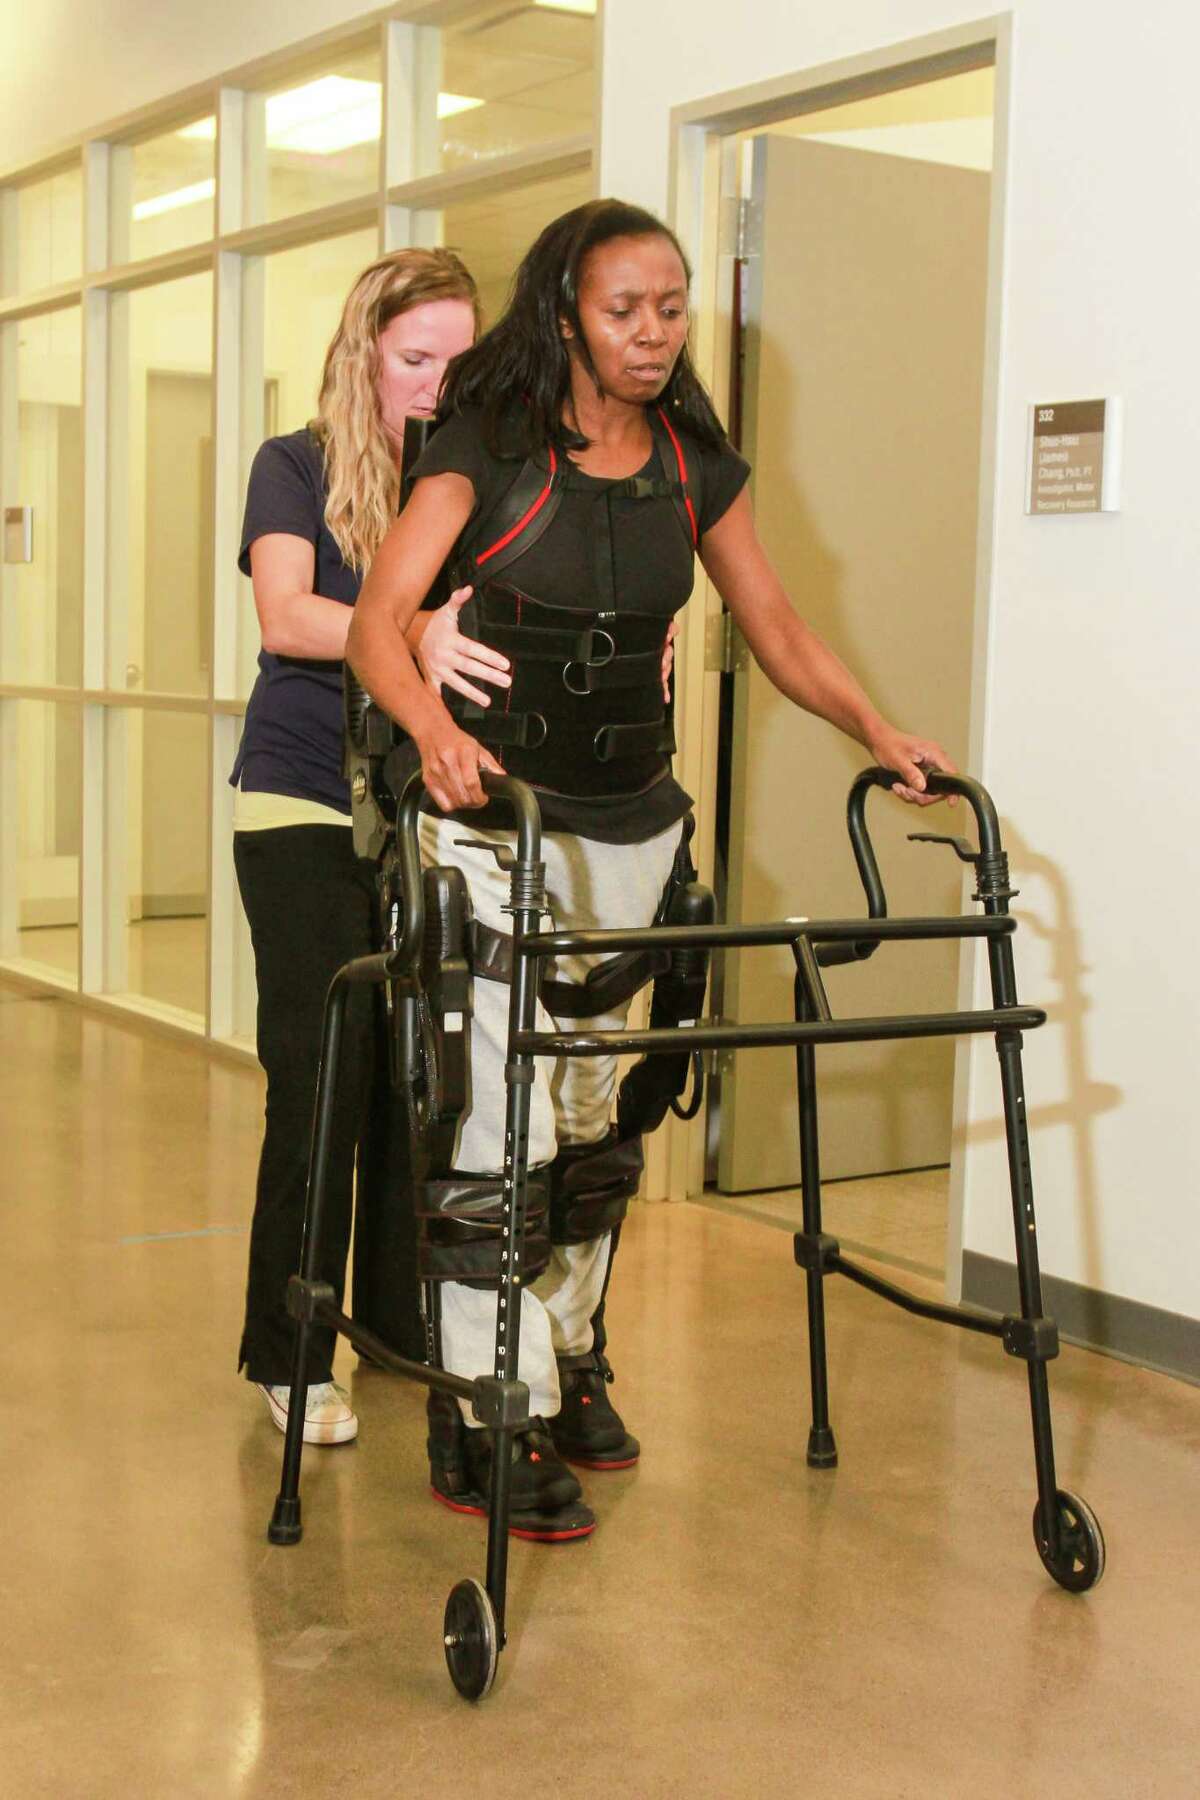 Physical therapist Erin Edenfield, left, aids Vikki McFarland, a study participant, in getting up to walk, wearing a Ekso wearable robotic device at TIRR Memorial Hermann. (For the Chronicle/Gary Fountain, November 3, 2017)